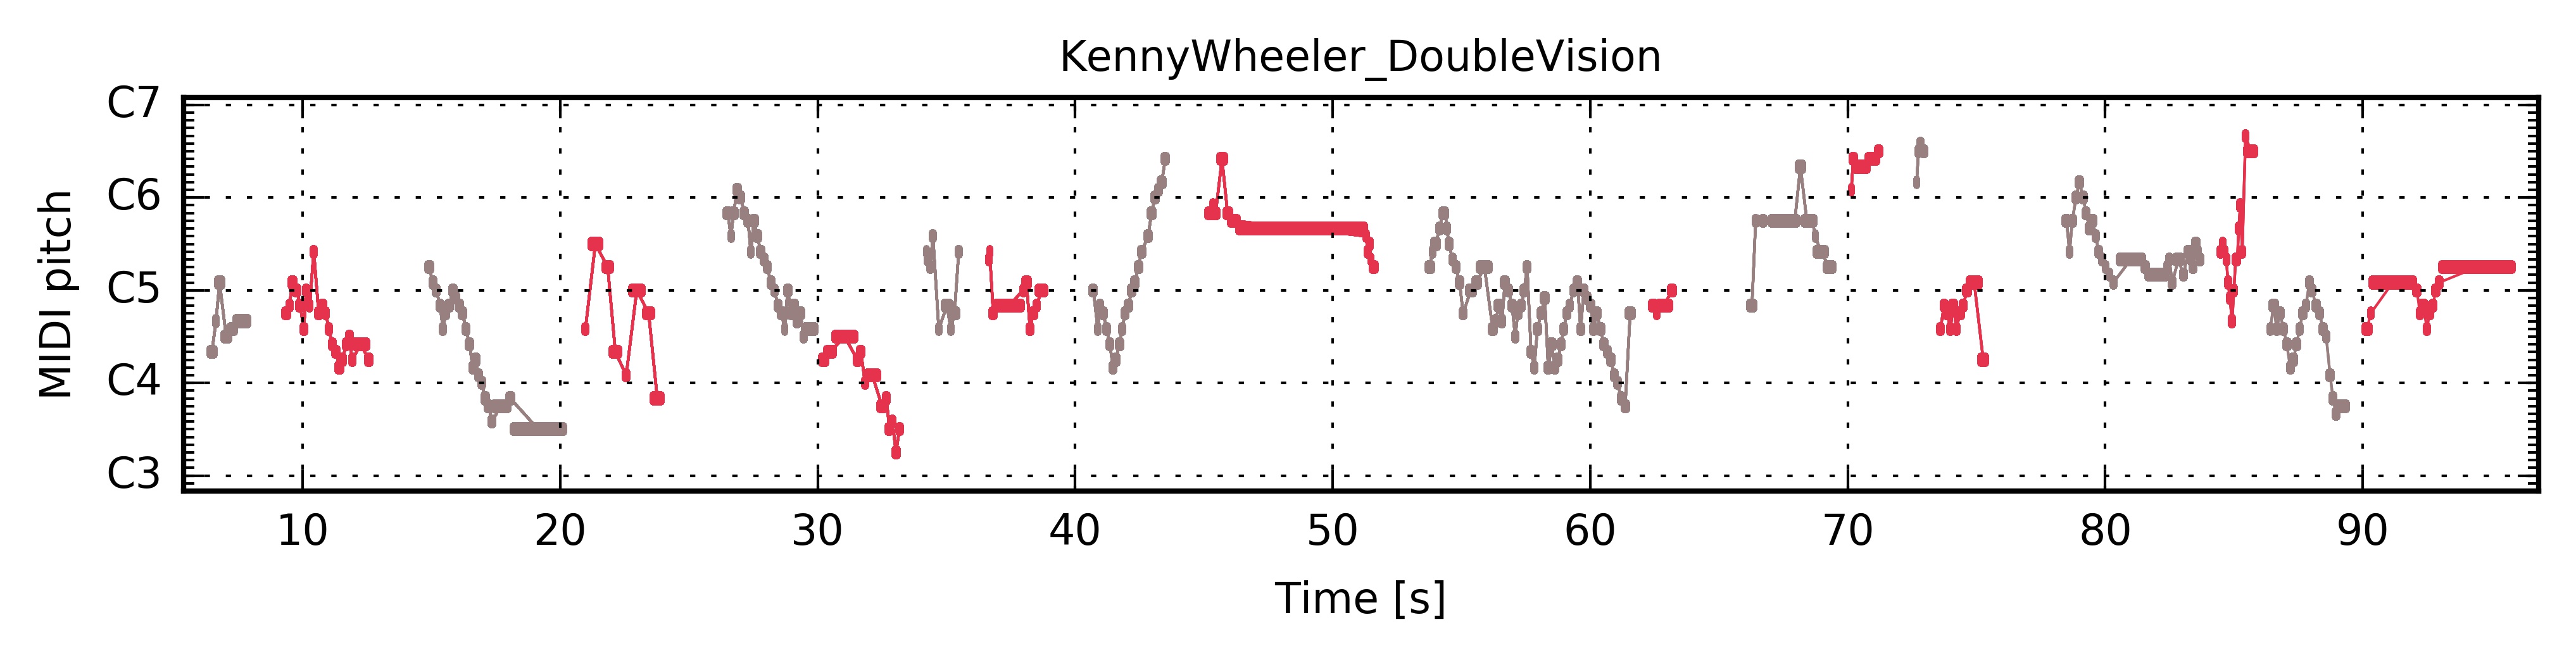 ../../_images/PianoRoll_KennyWheeler_DoubleVision.jpg